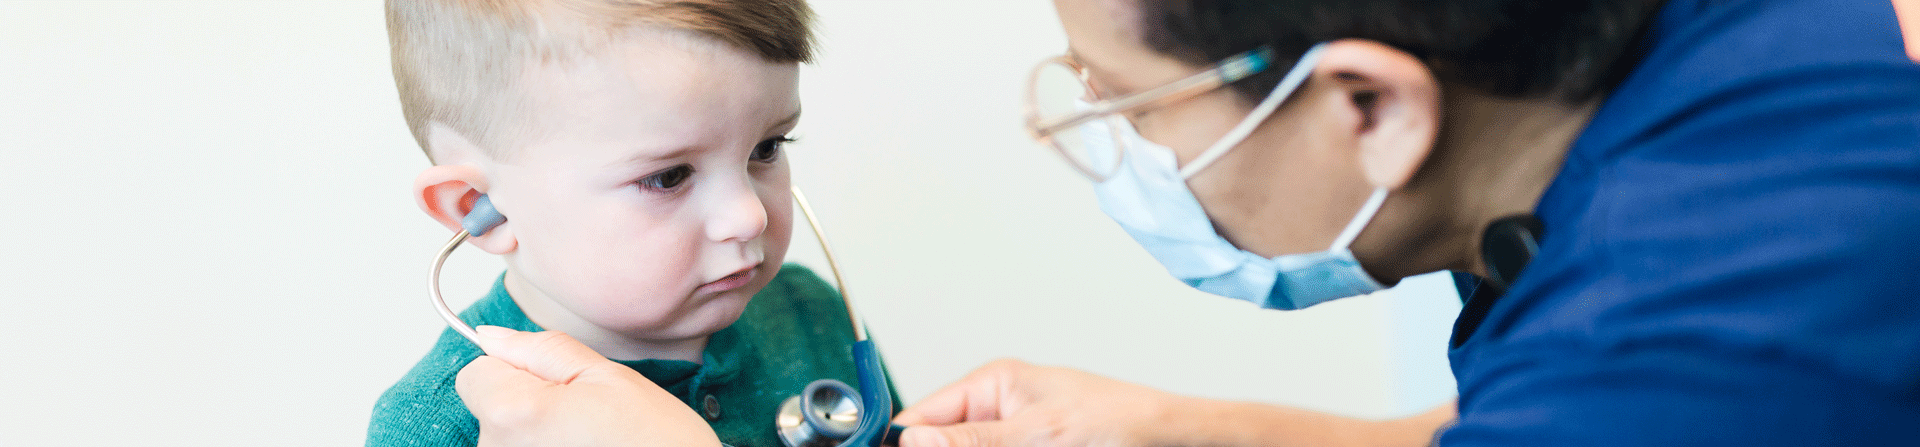 A healthcare provider letting a young boy listen to his own heart with a stethoscope.